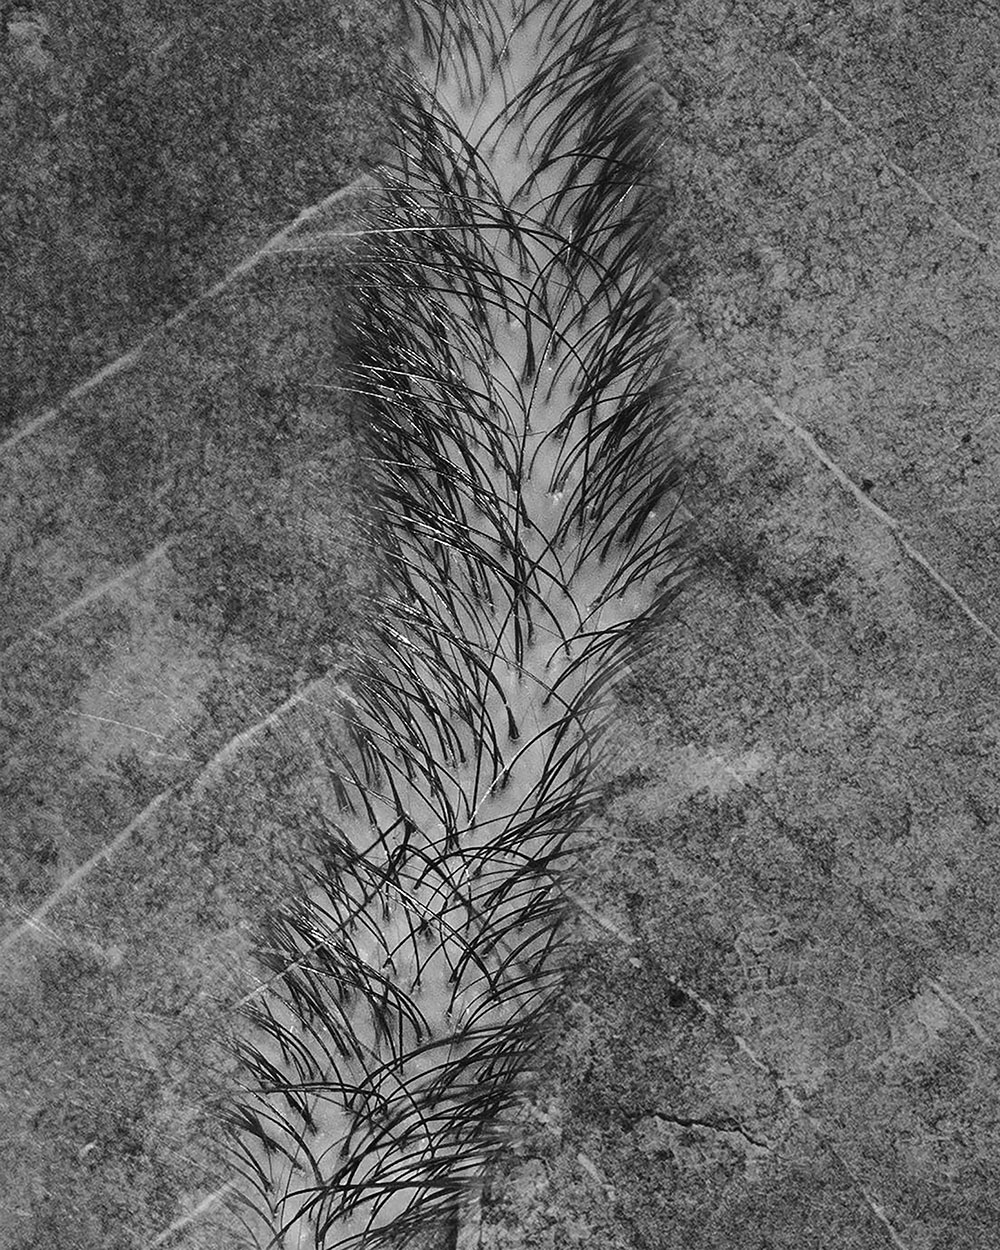 black and white photo by MSU photo student Kaneesha Handy of a leaf with hair in the middle